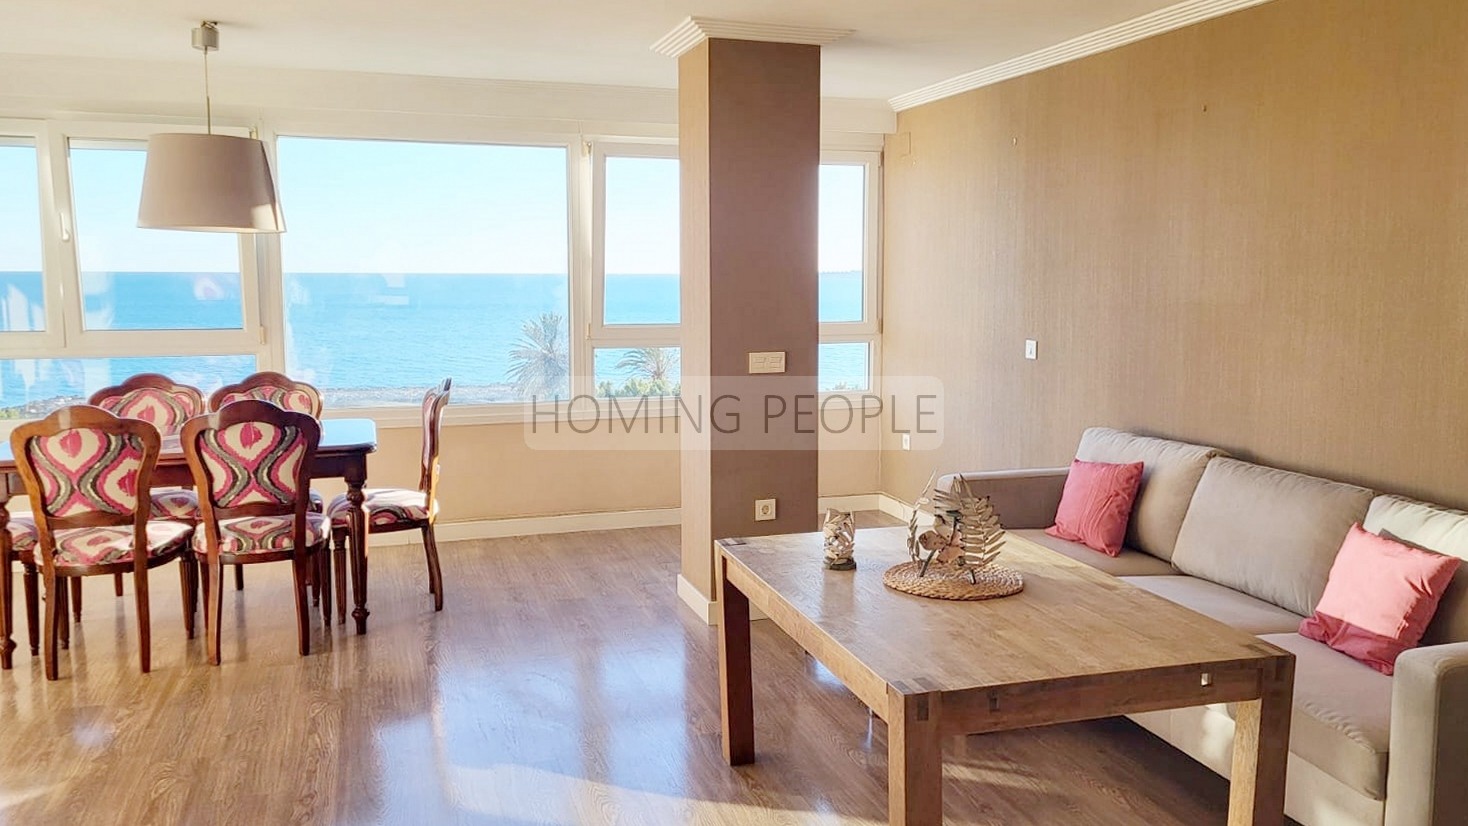 [RENTED OUT] Large sunny flat with stunning sea views